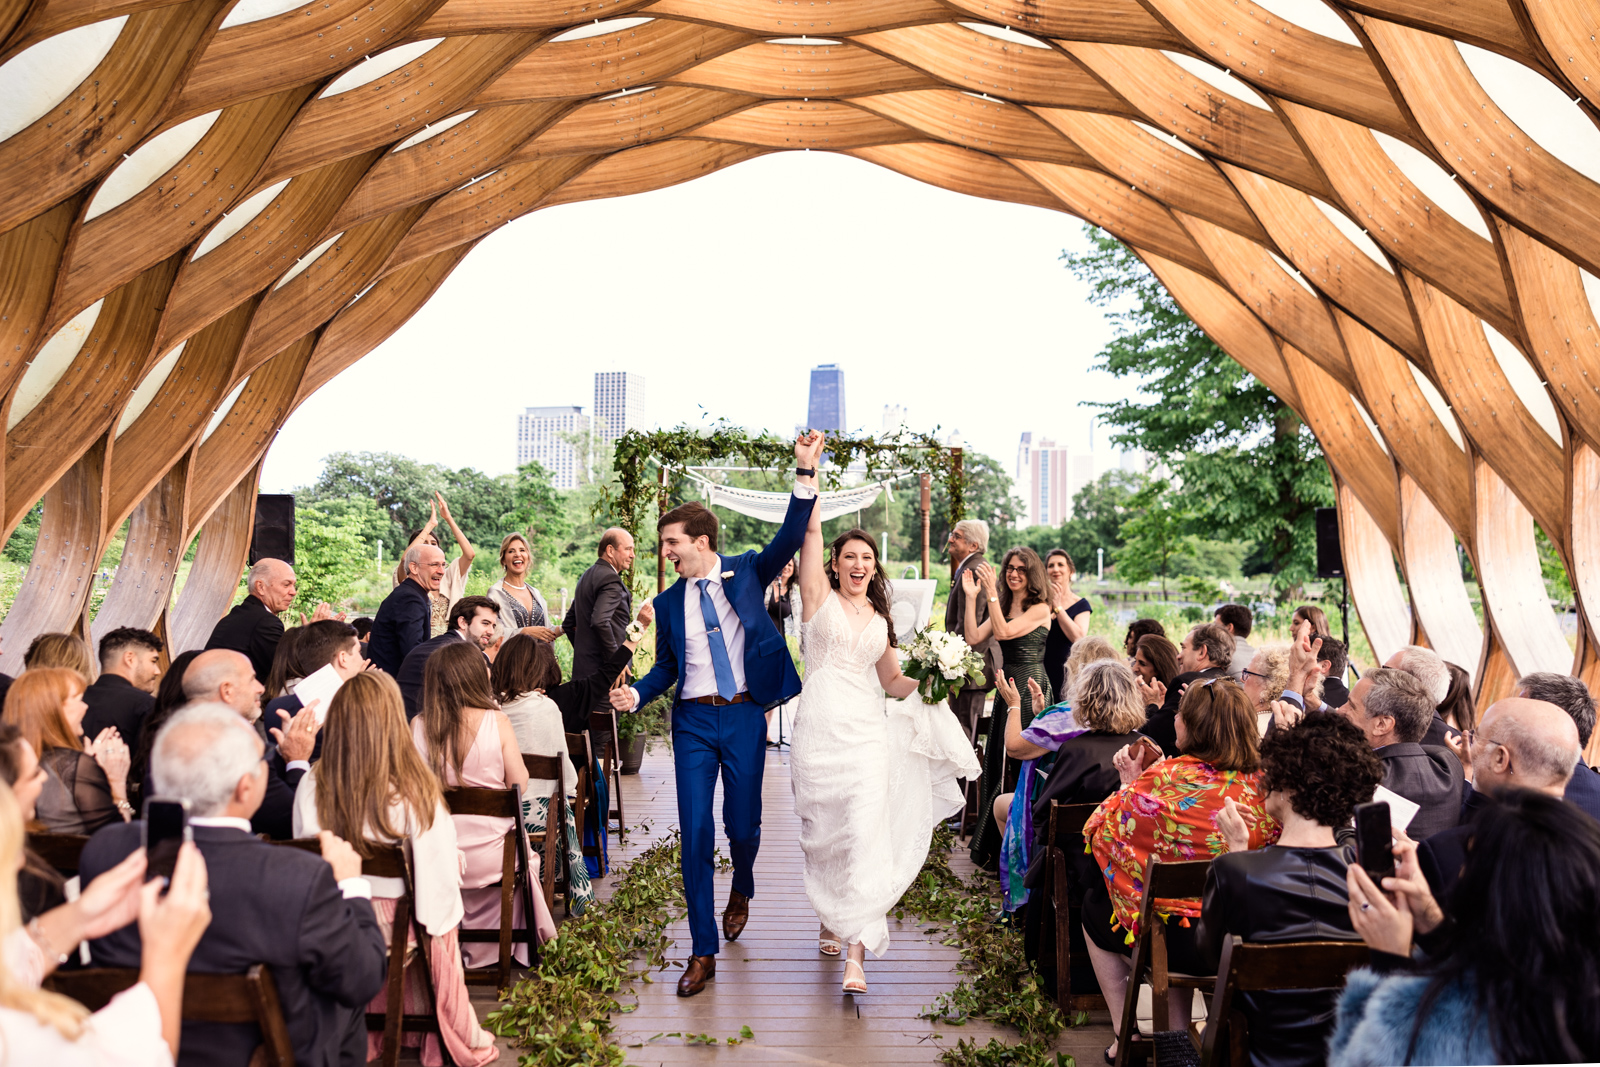 Lincoln Park Honeycomb wedding ceremony in Chicago by documentary wedding photographer Emma Mullins Photography